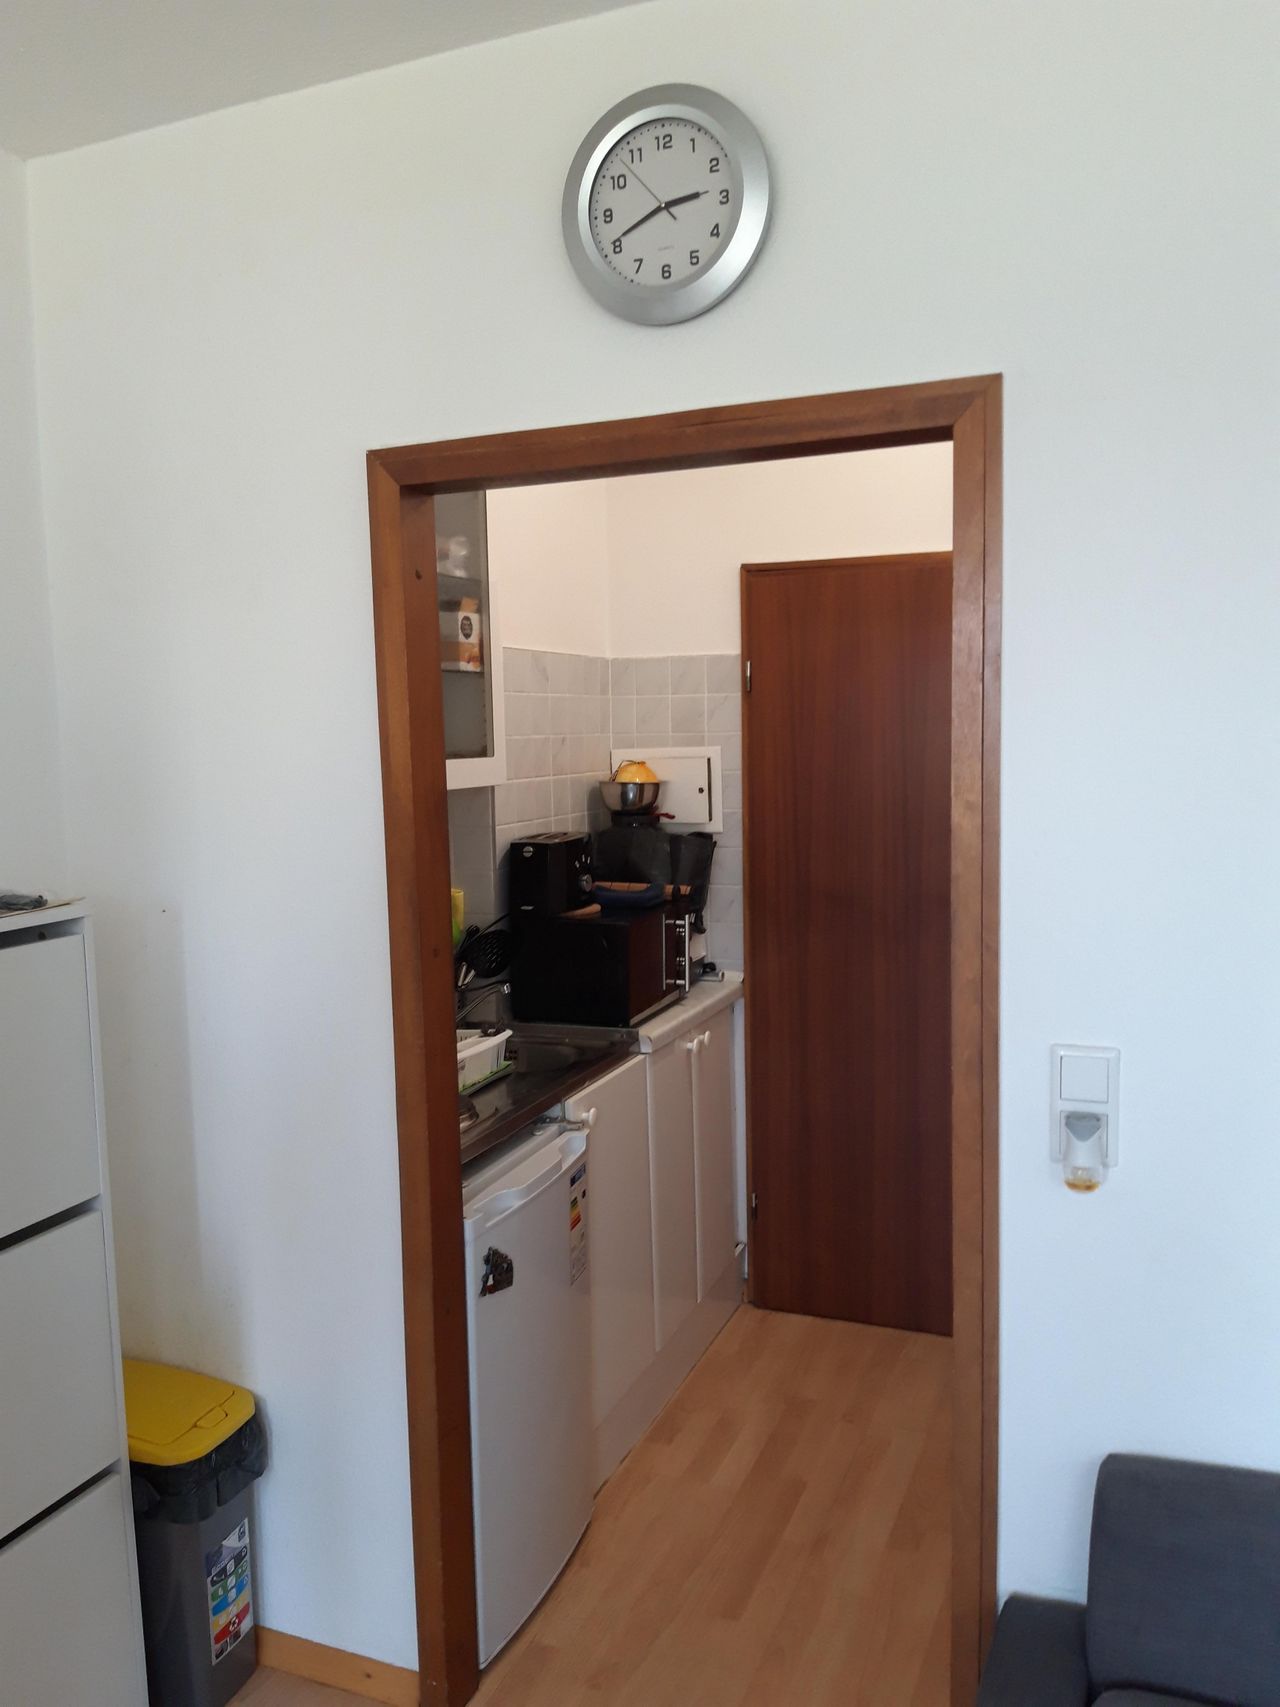 Small furnited Appartement, also for student in a searched area of Düsseldorf